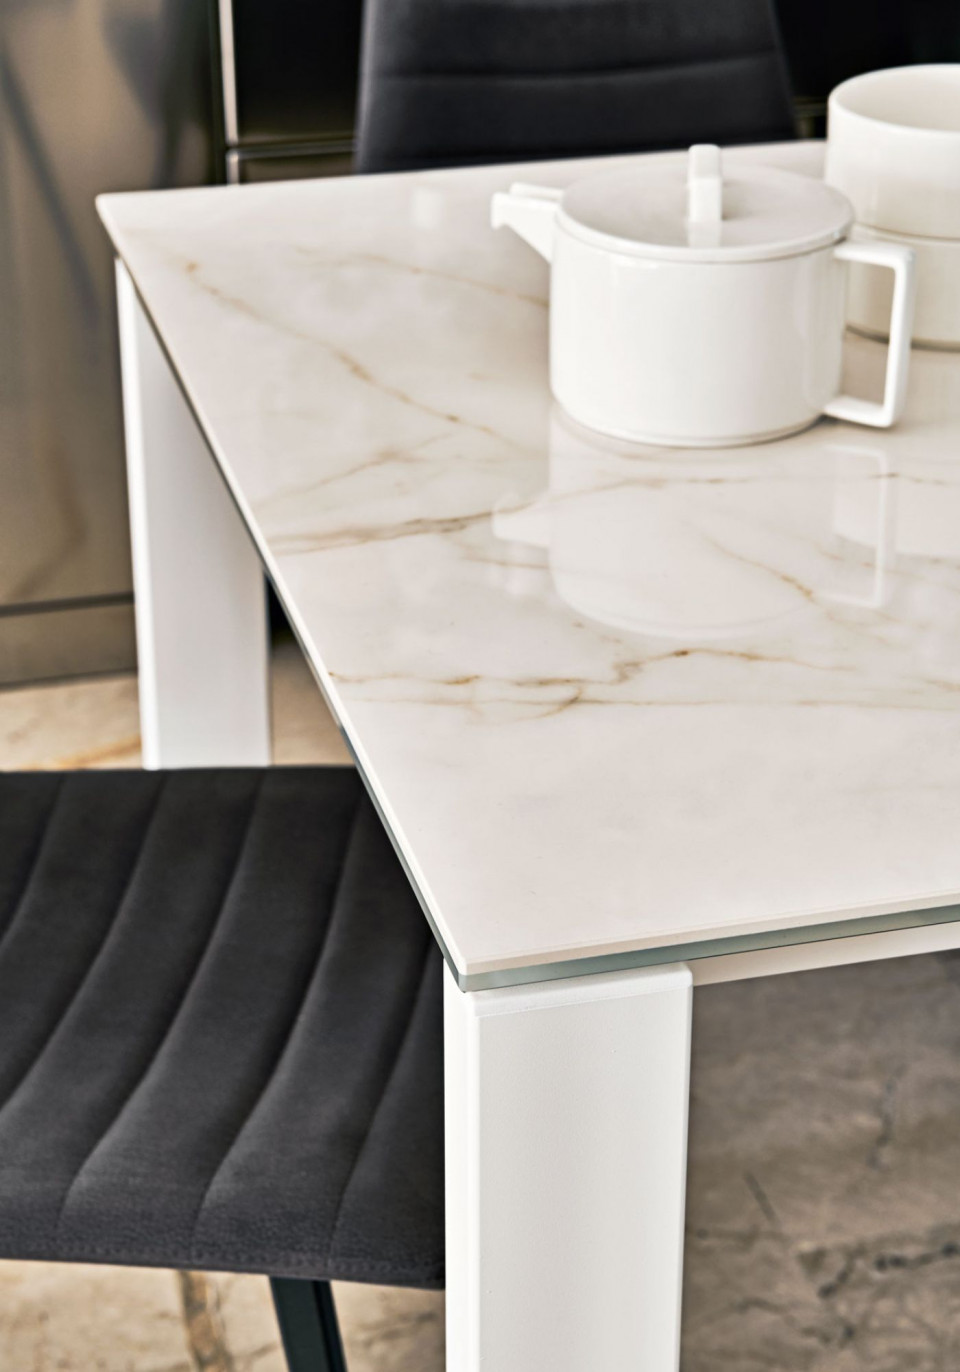 White Badù kitchen table with calacatta marble cristalceramic top